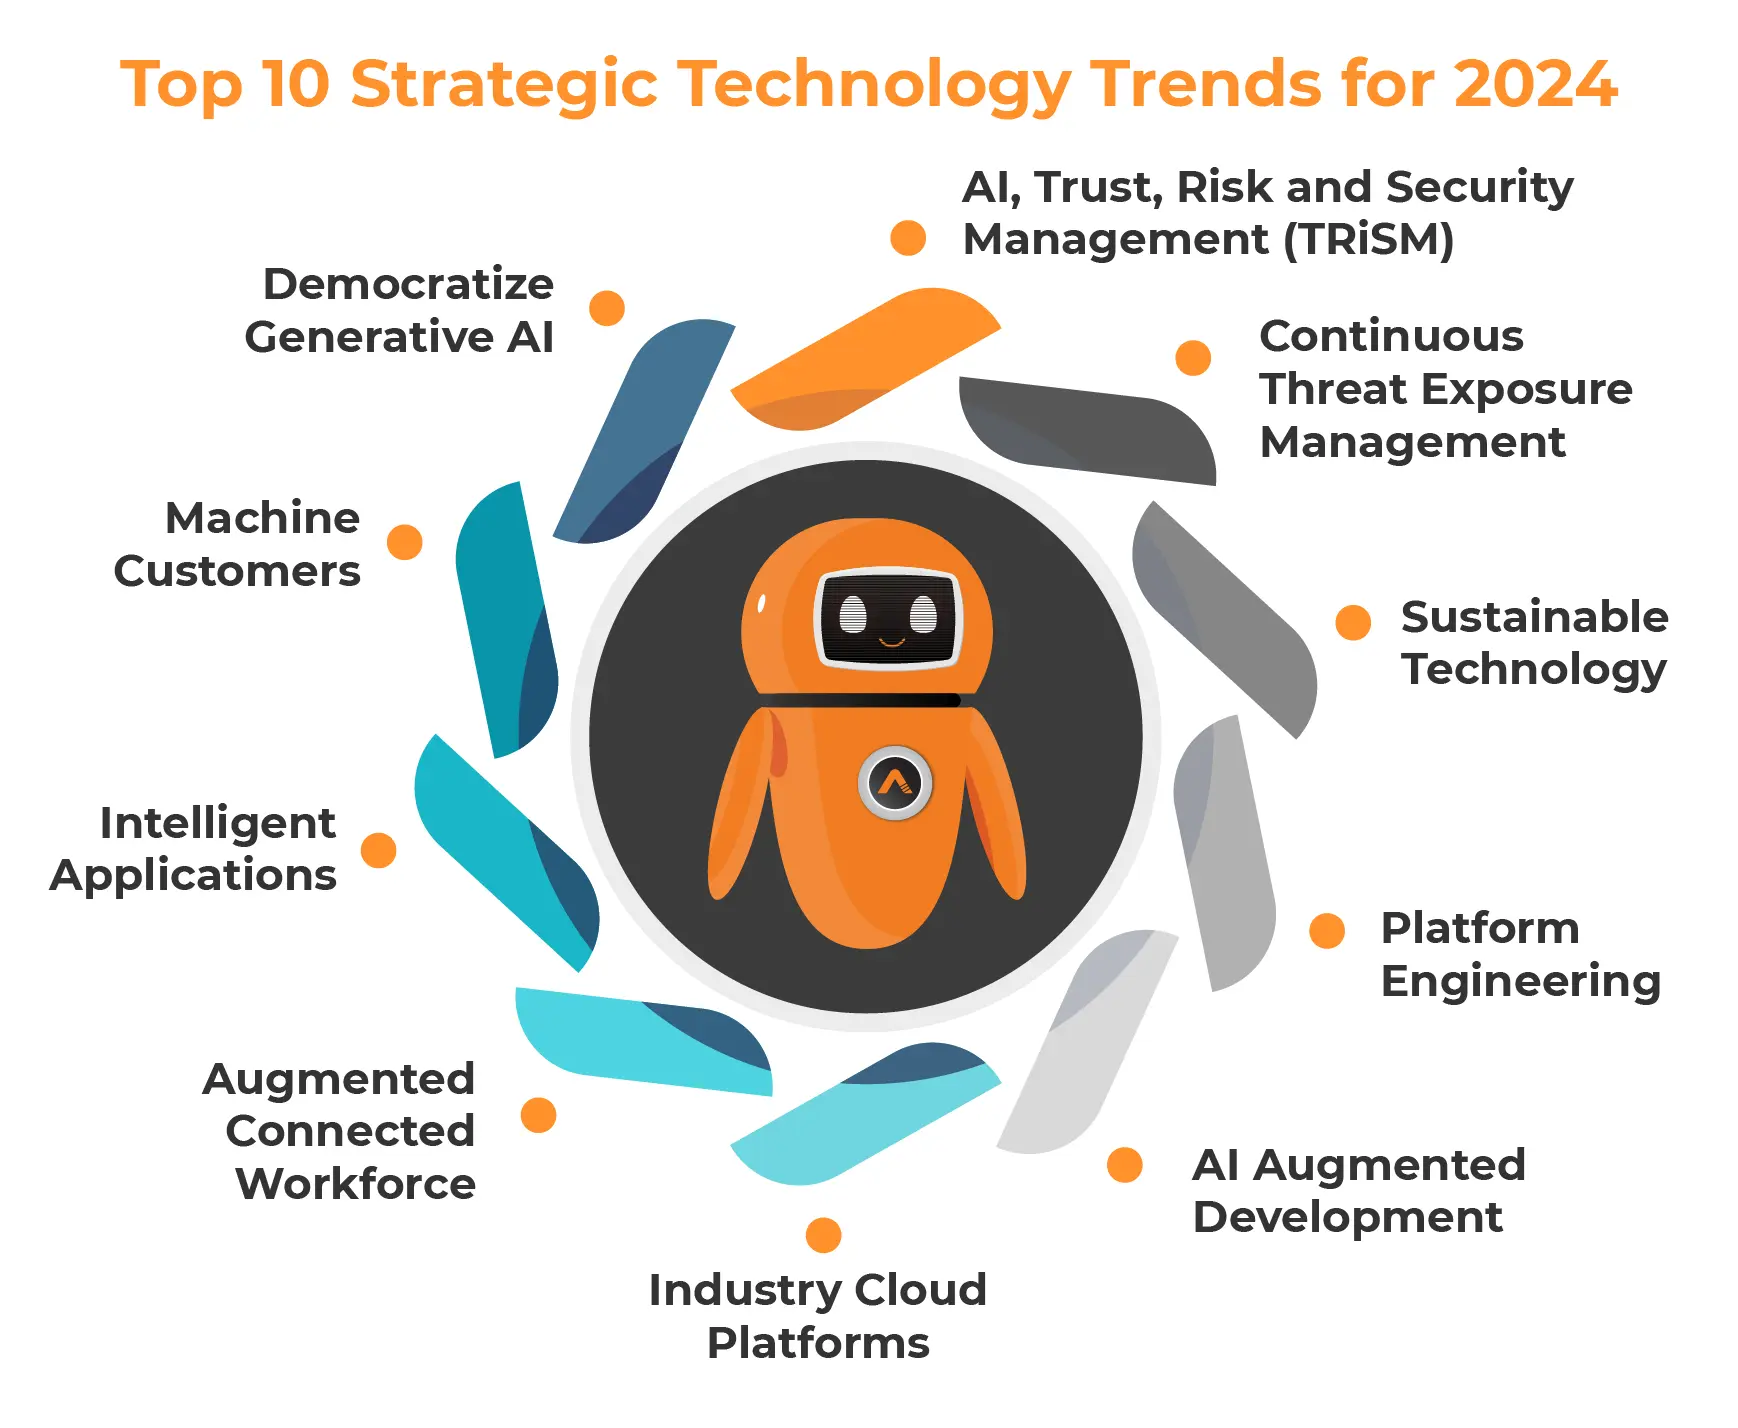 Top 10 Strategic Technology Trends in 2024